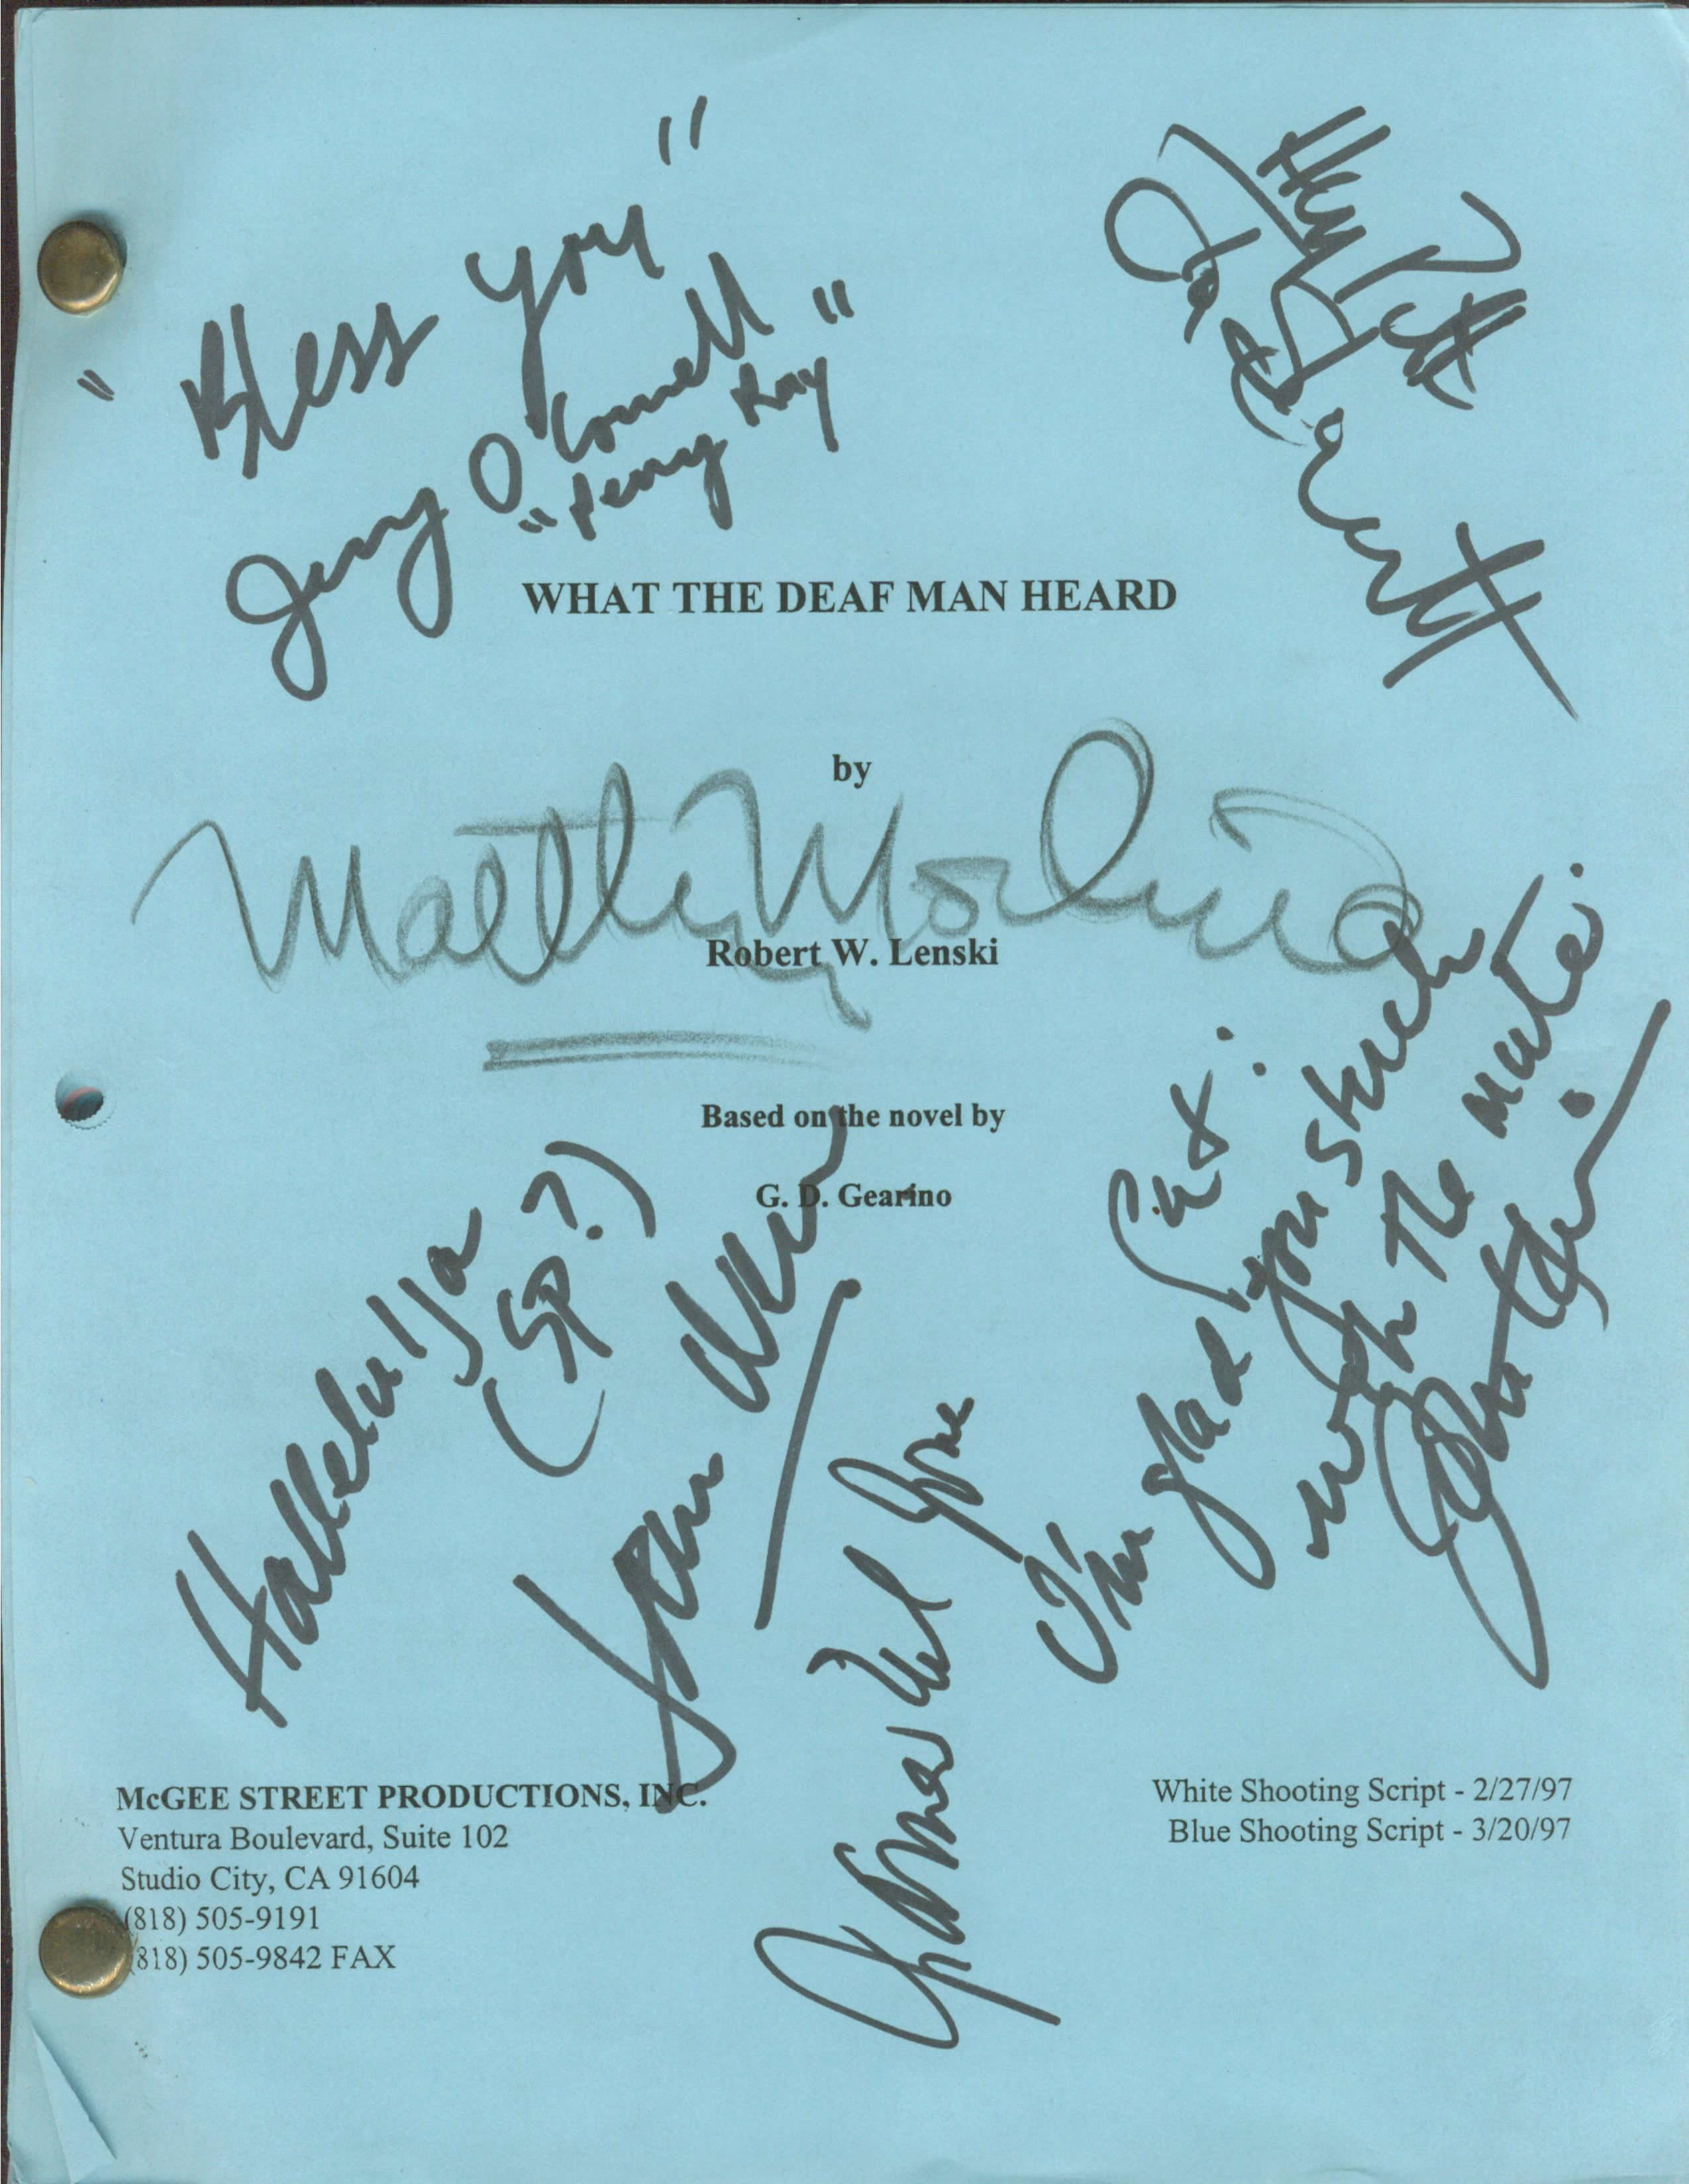 WHAT THE DEAF MAN HEARD: Patt Noday: signed script cover from the Hallmark Channel classic 